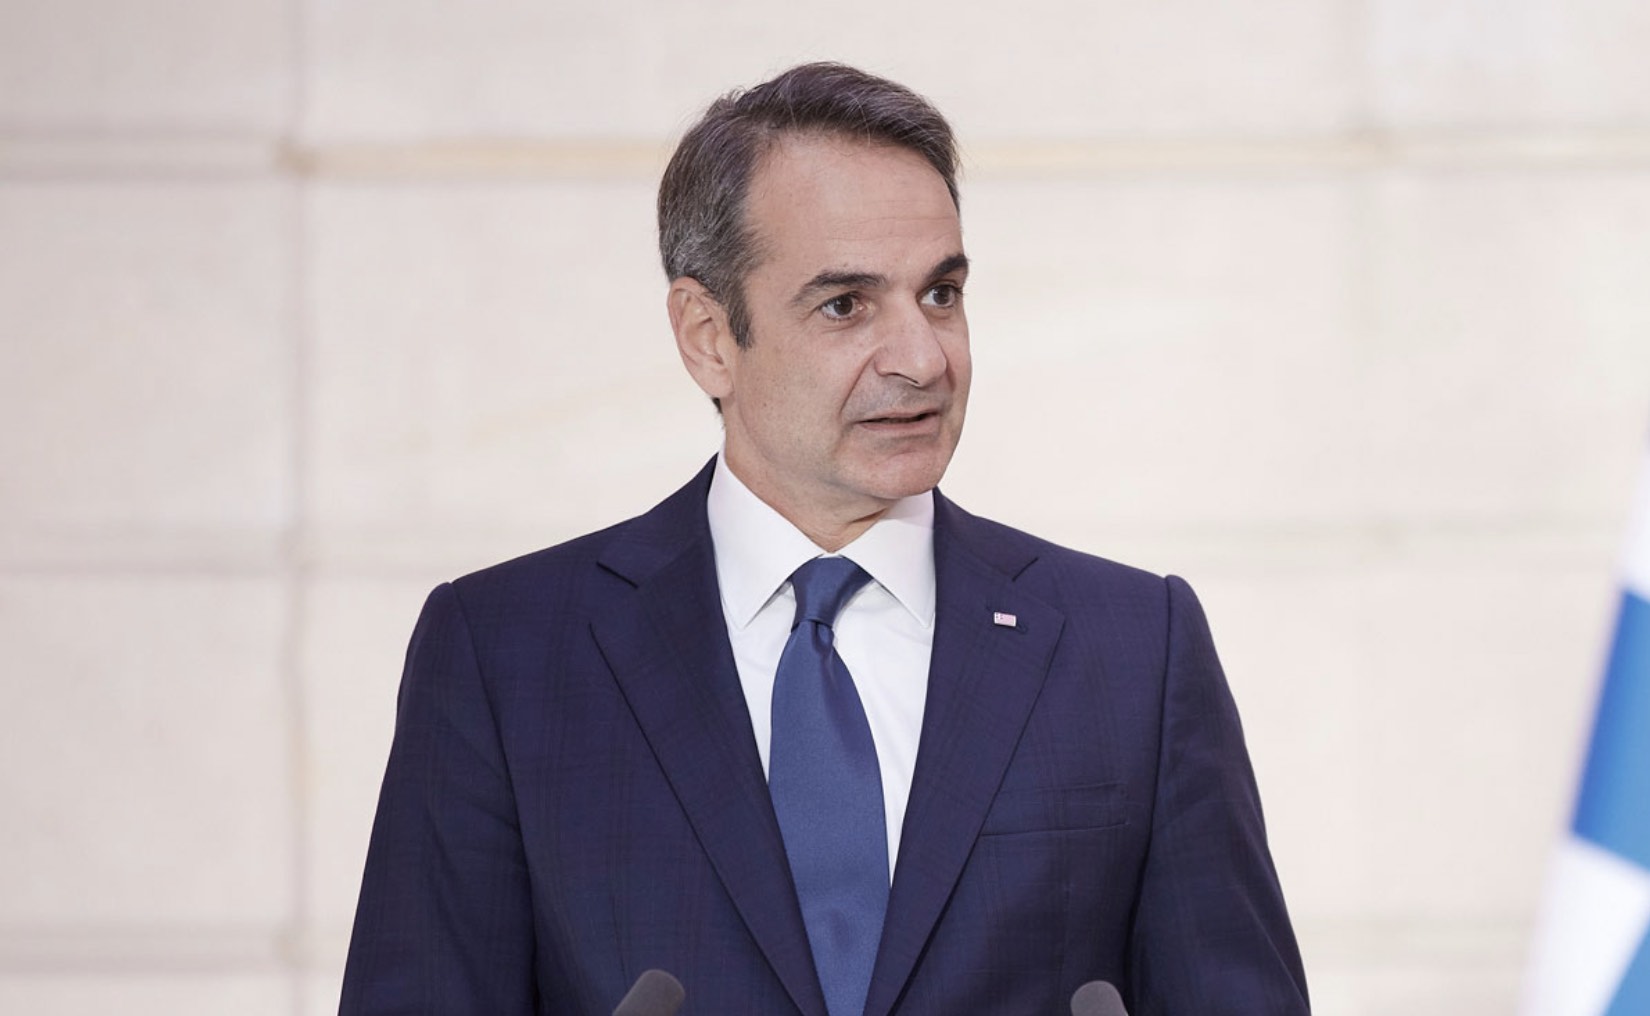 Greek PM Mitsotakis Interview on Tempi, Inflation, Domestic Violence